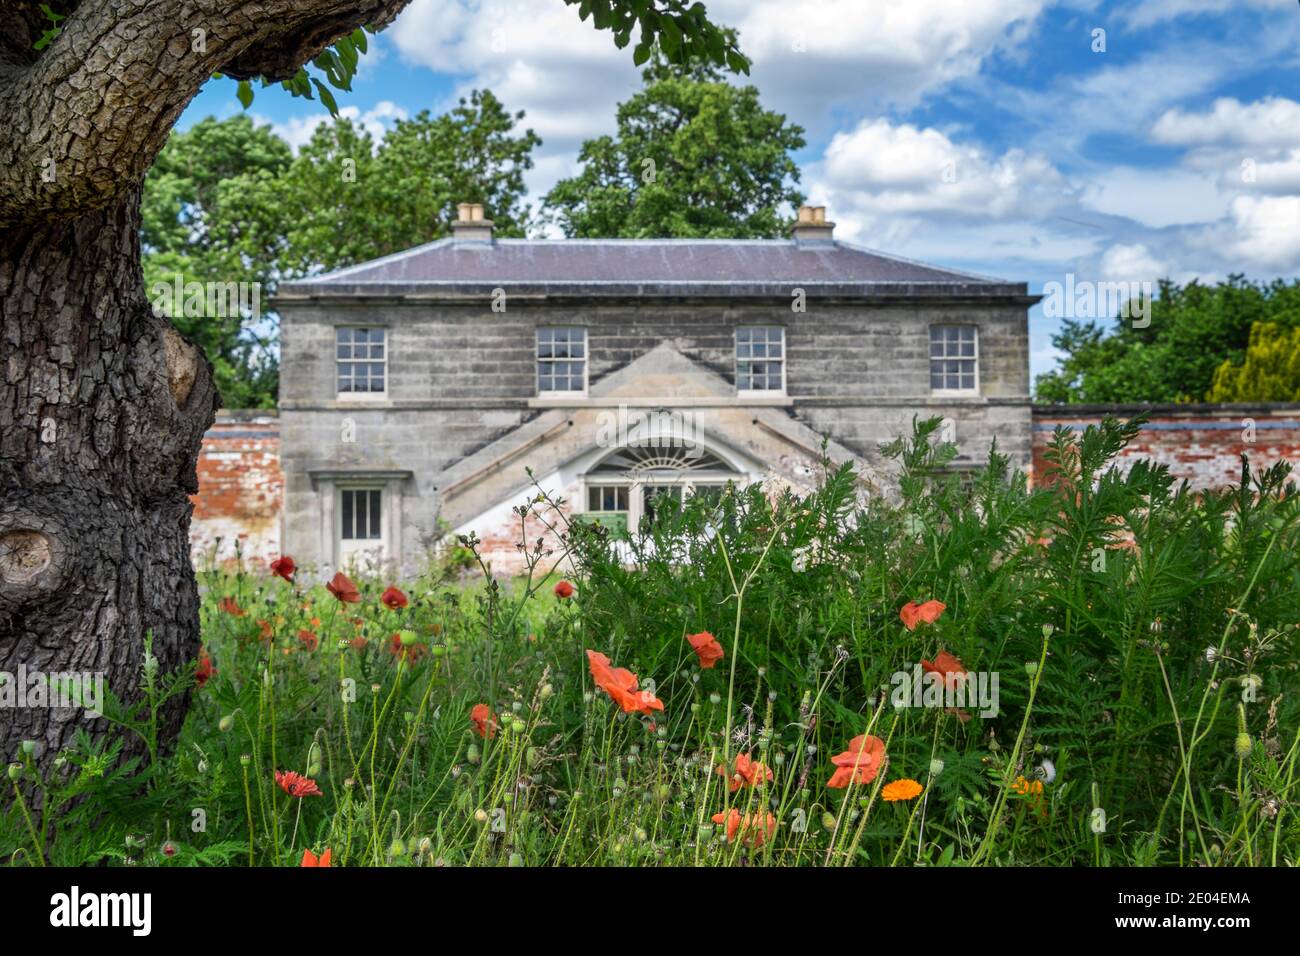 The walled garden & head gardener's house,  located in the grounds of the Shugborough Estate, near to Stafford, Staffordshire, England, UK Stock Photo